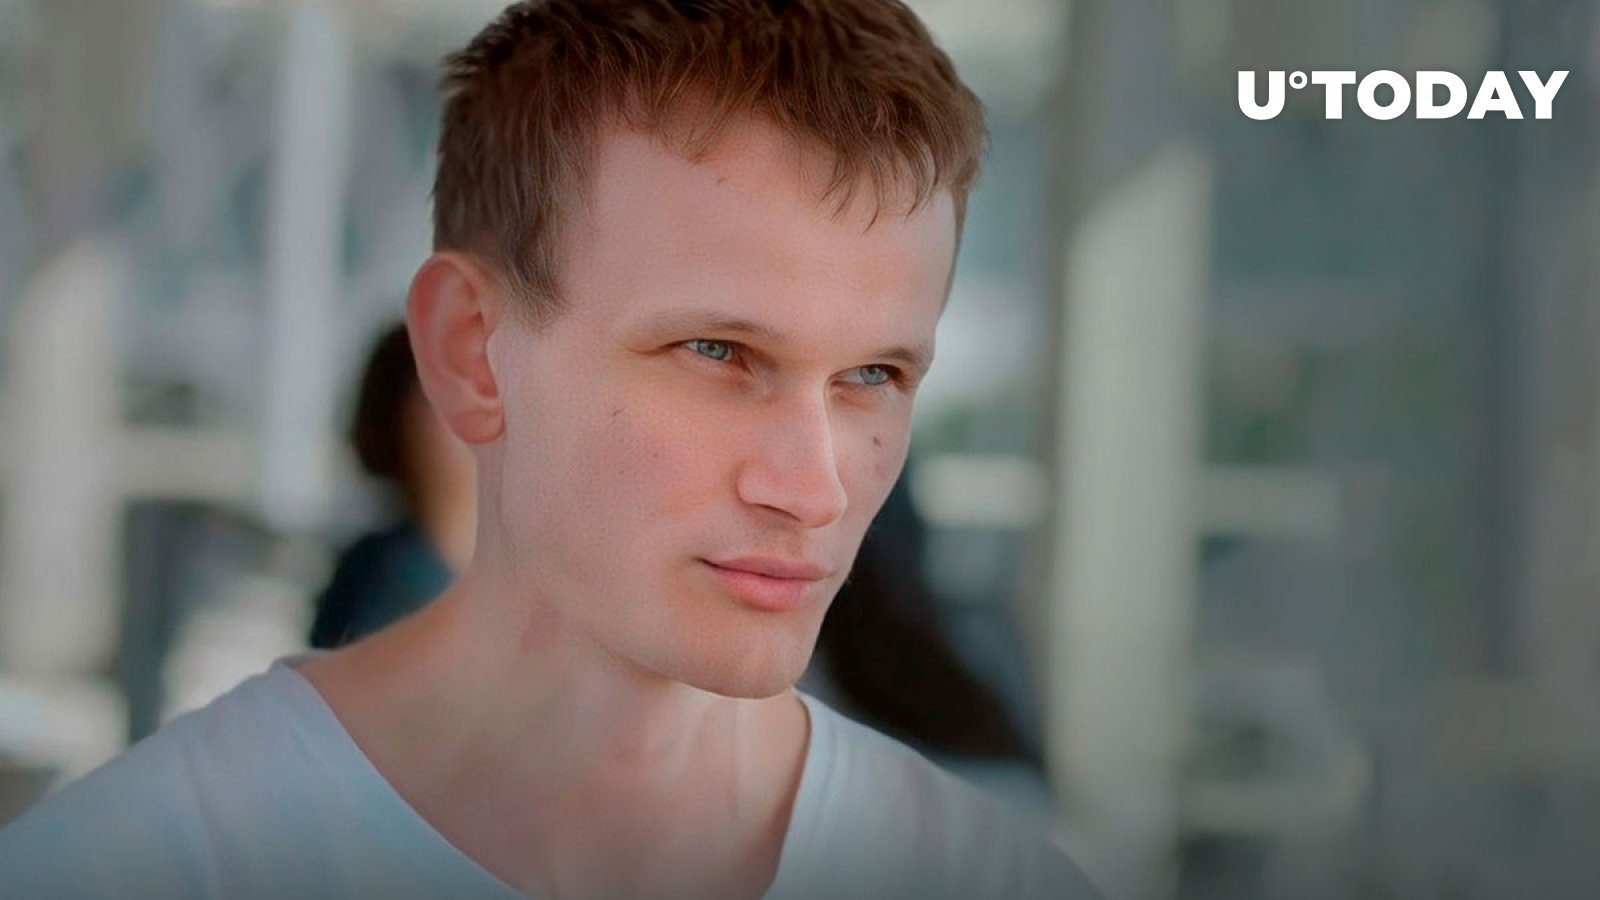 Is Dogecoin Next? Ethereum’s Vitalik Buterin Says Meme Coin Should Move to Proof-of-Stake